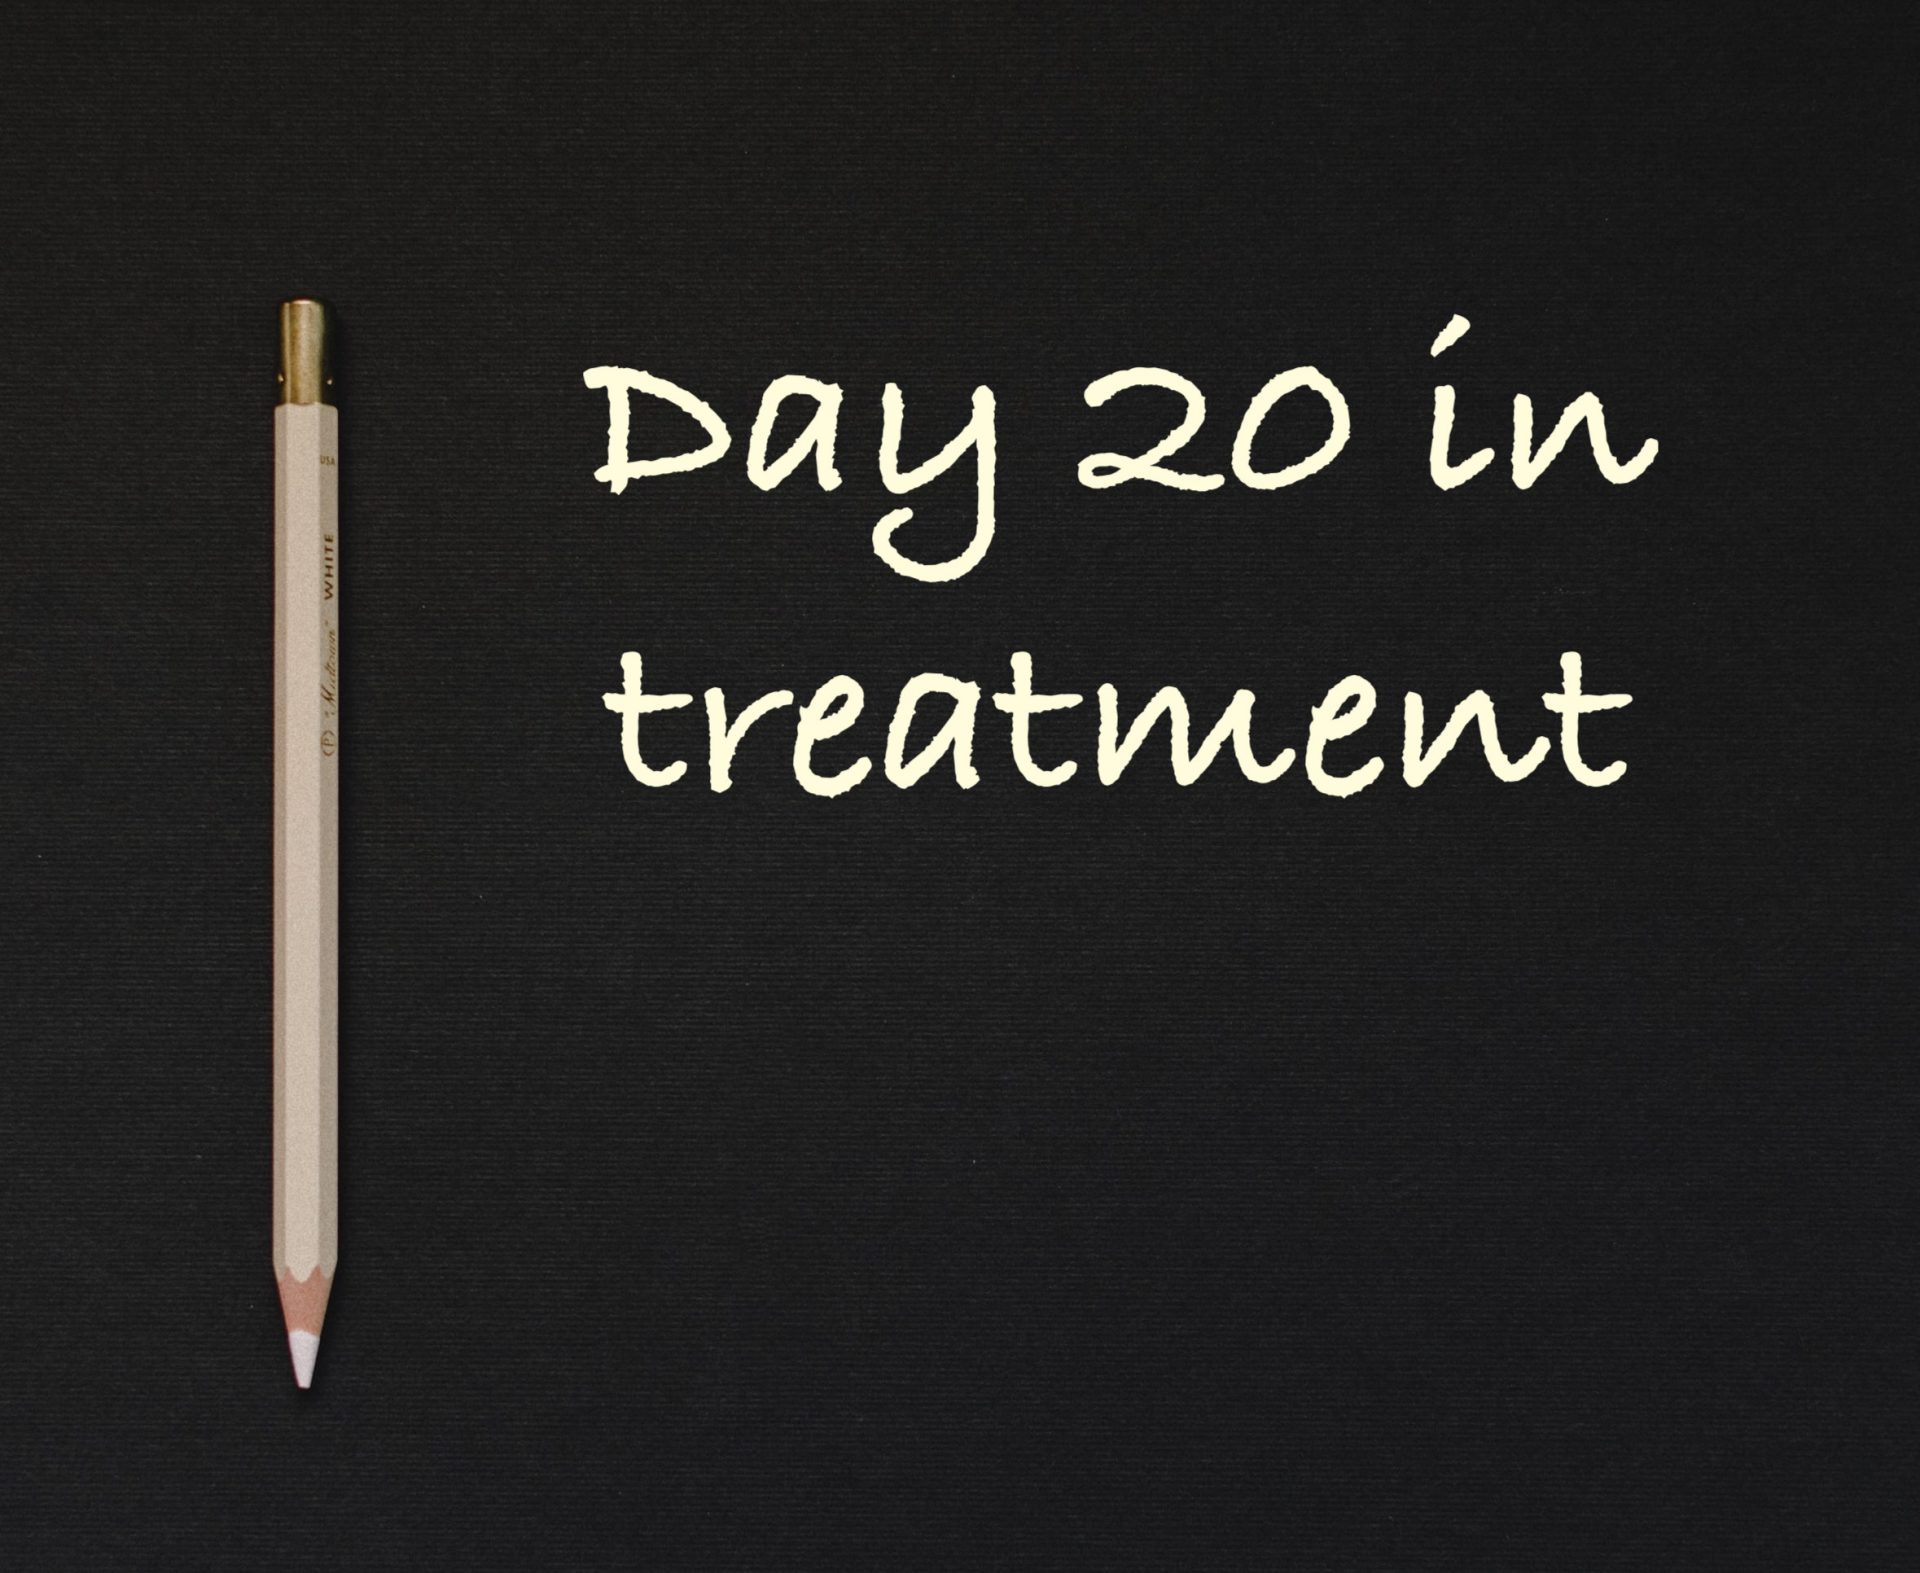 Day 20 in treatment